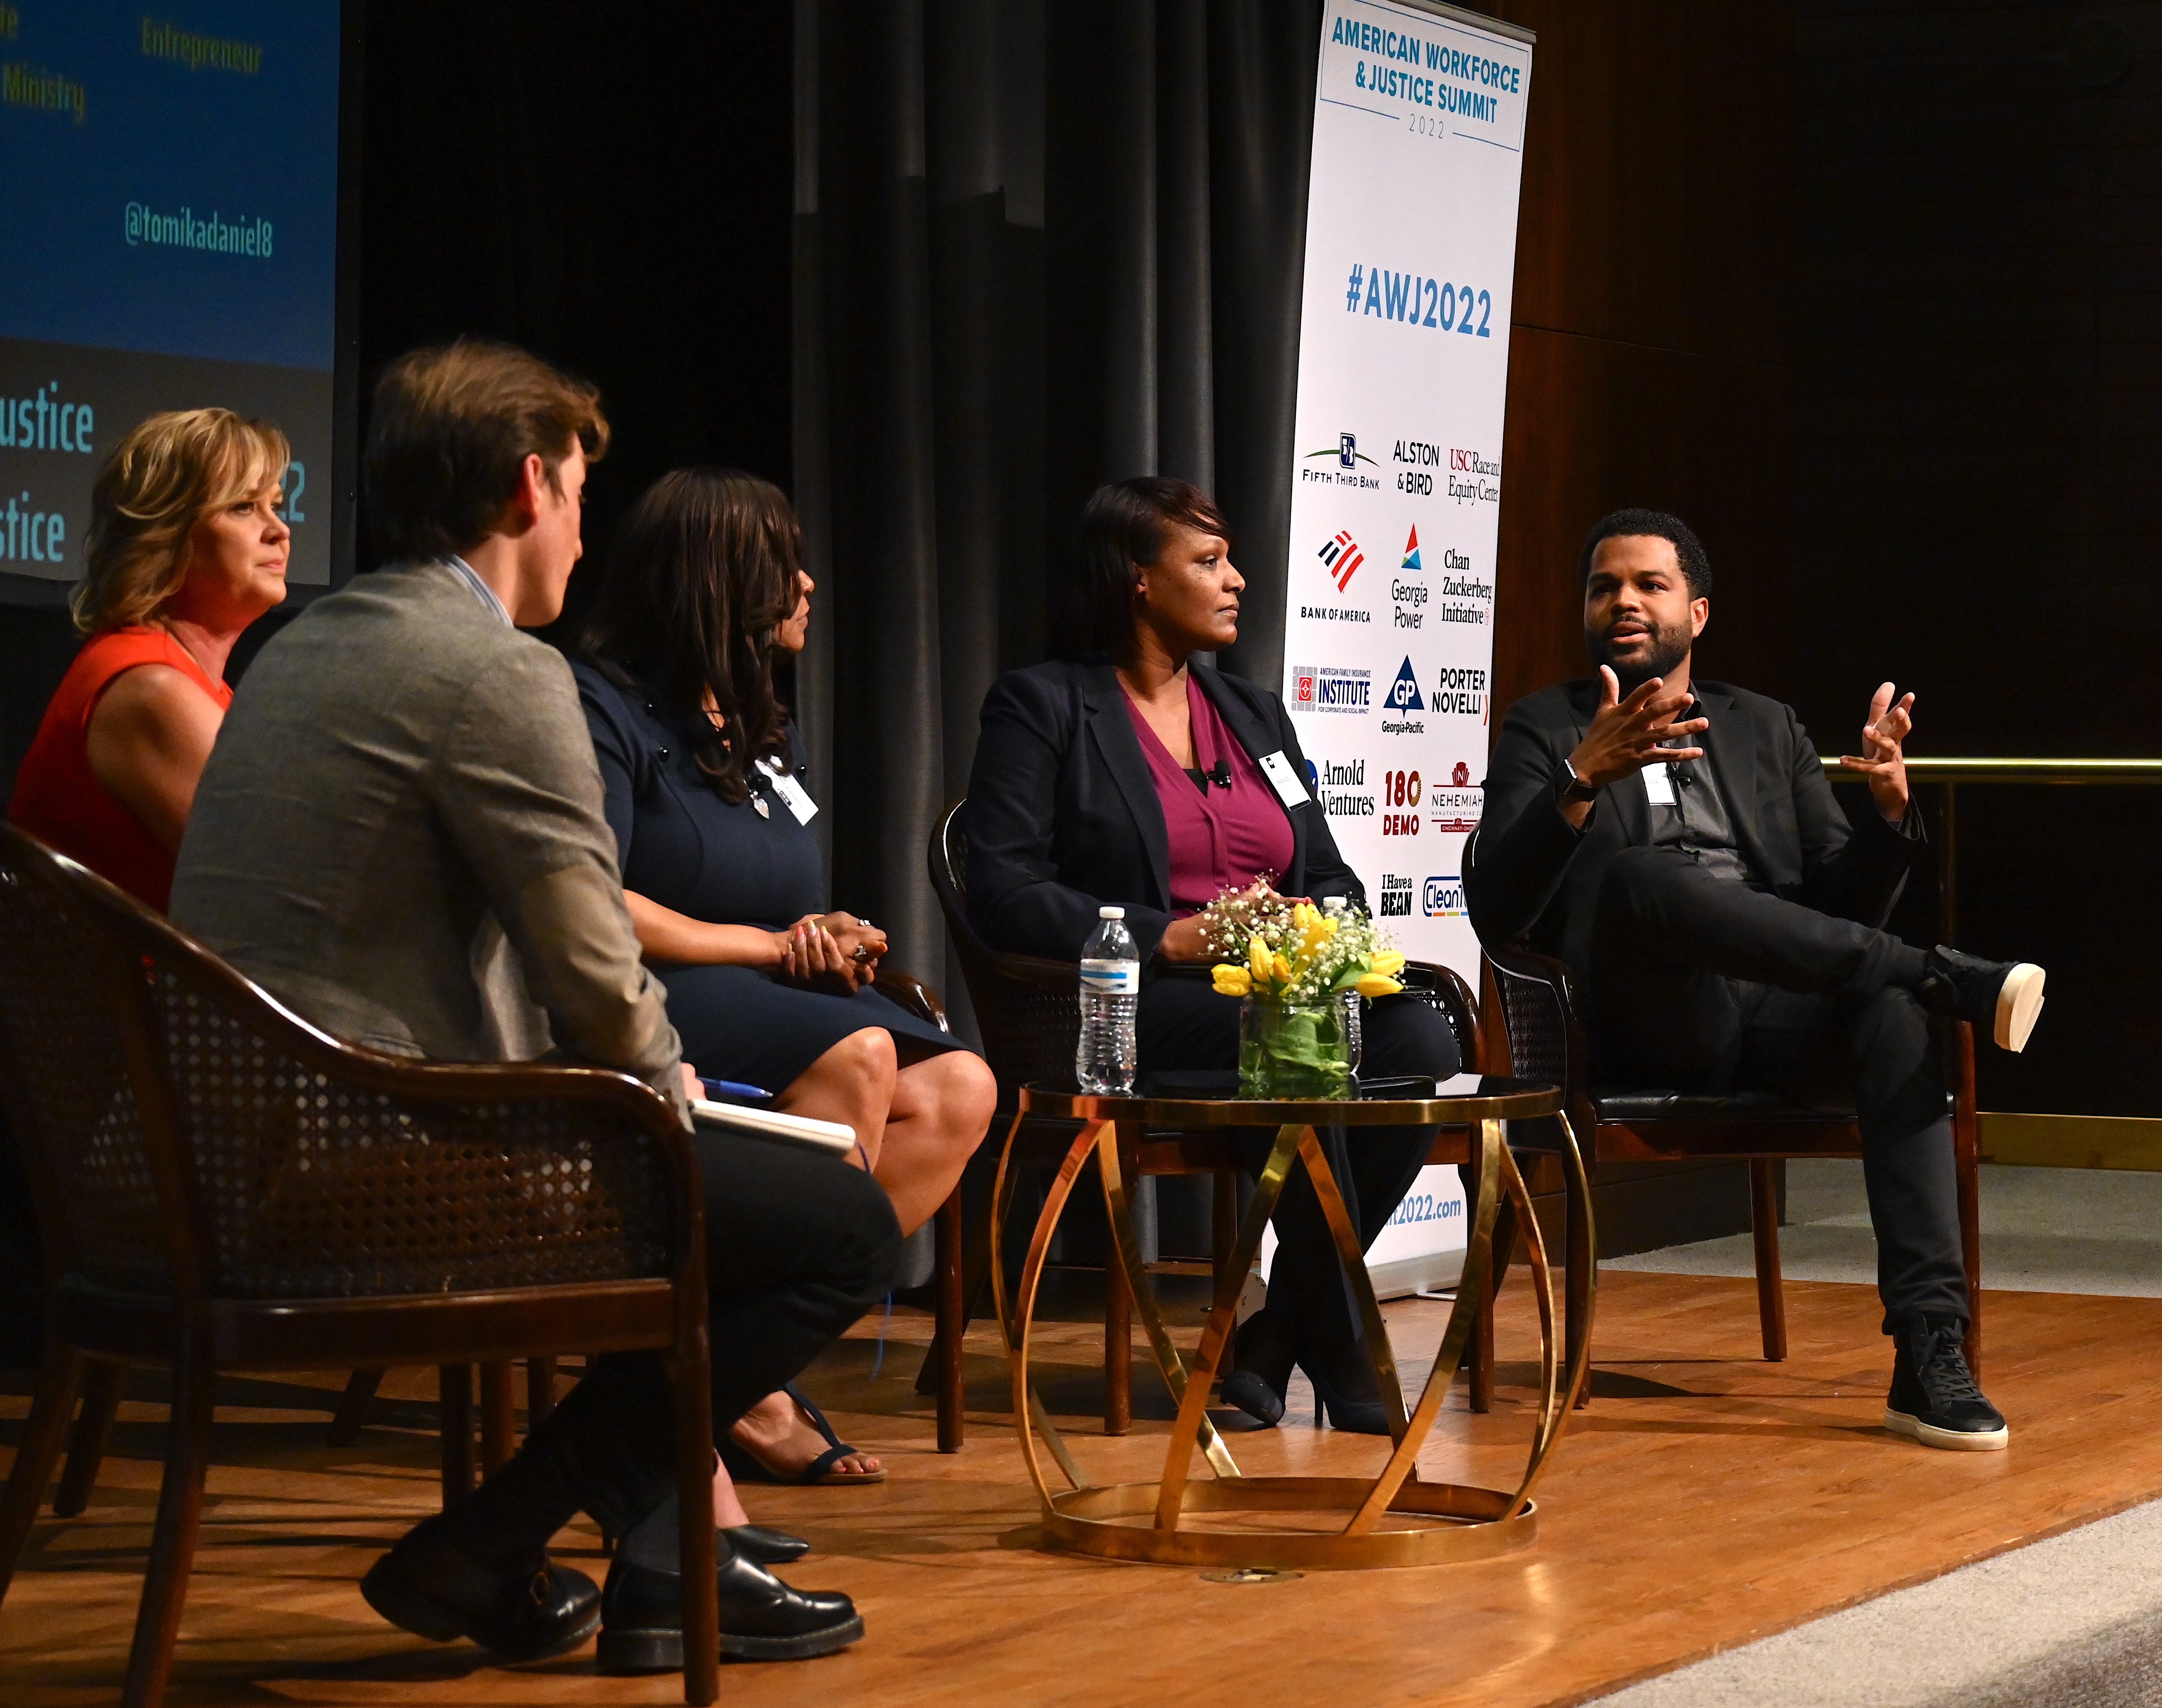 Josh Marcus of The Independent , Michelle Cirocco of Televerde, Tomika Daniel of Bailees Logistics, Malika Kidd of Lutheran Metropolitan Ministries, and Daniel Forkkio of Represent Justice on a panel discussion at the American Workforce and Justice Summit